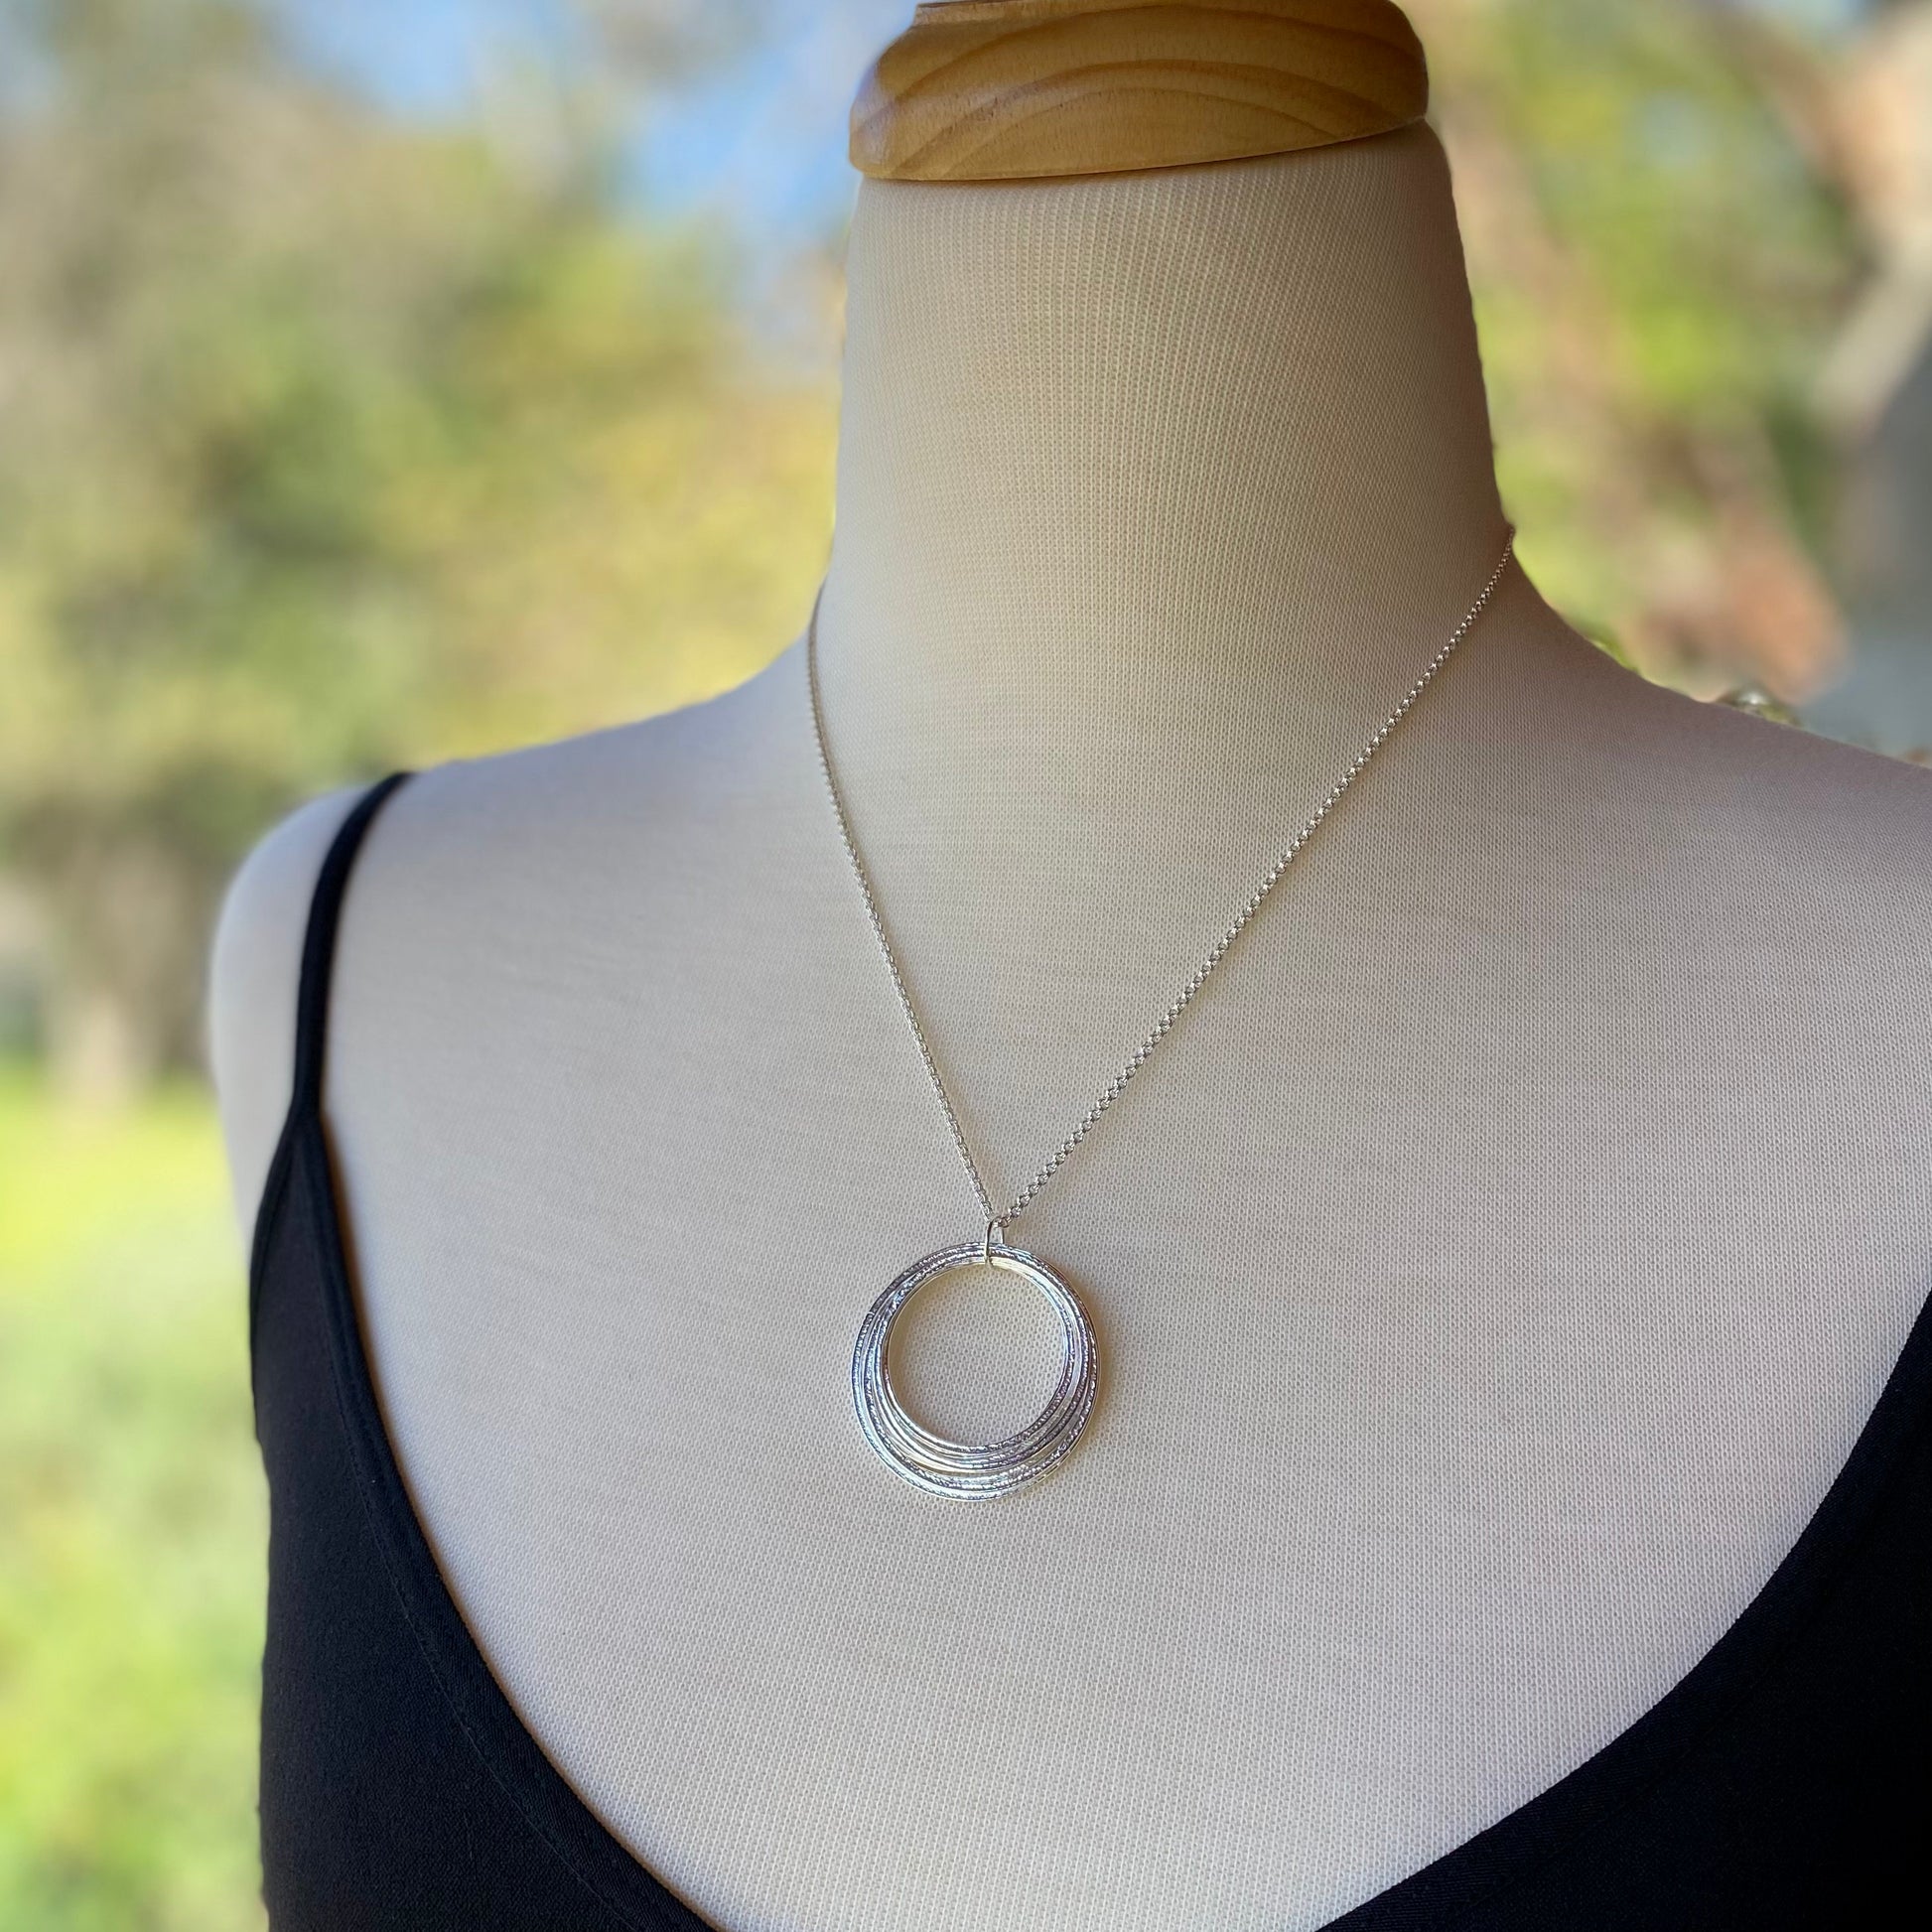 9 Circle 90th Birthday Milestone Necklace, Bold Sterling Silver Handcrafted Sparkly Circles Pendant, 9 Rings for 9 Decades, Large Circles